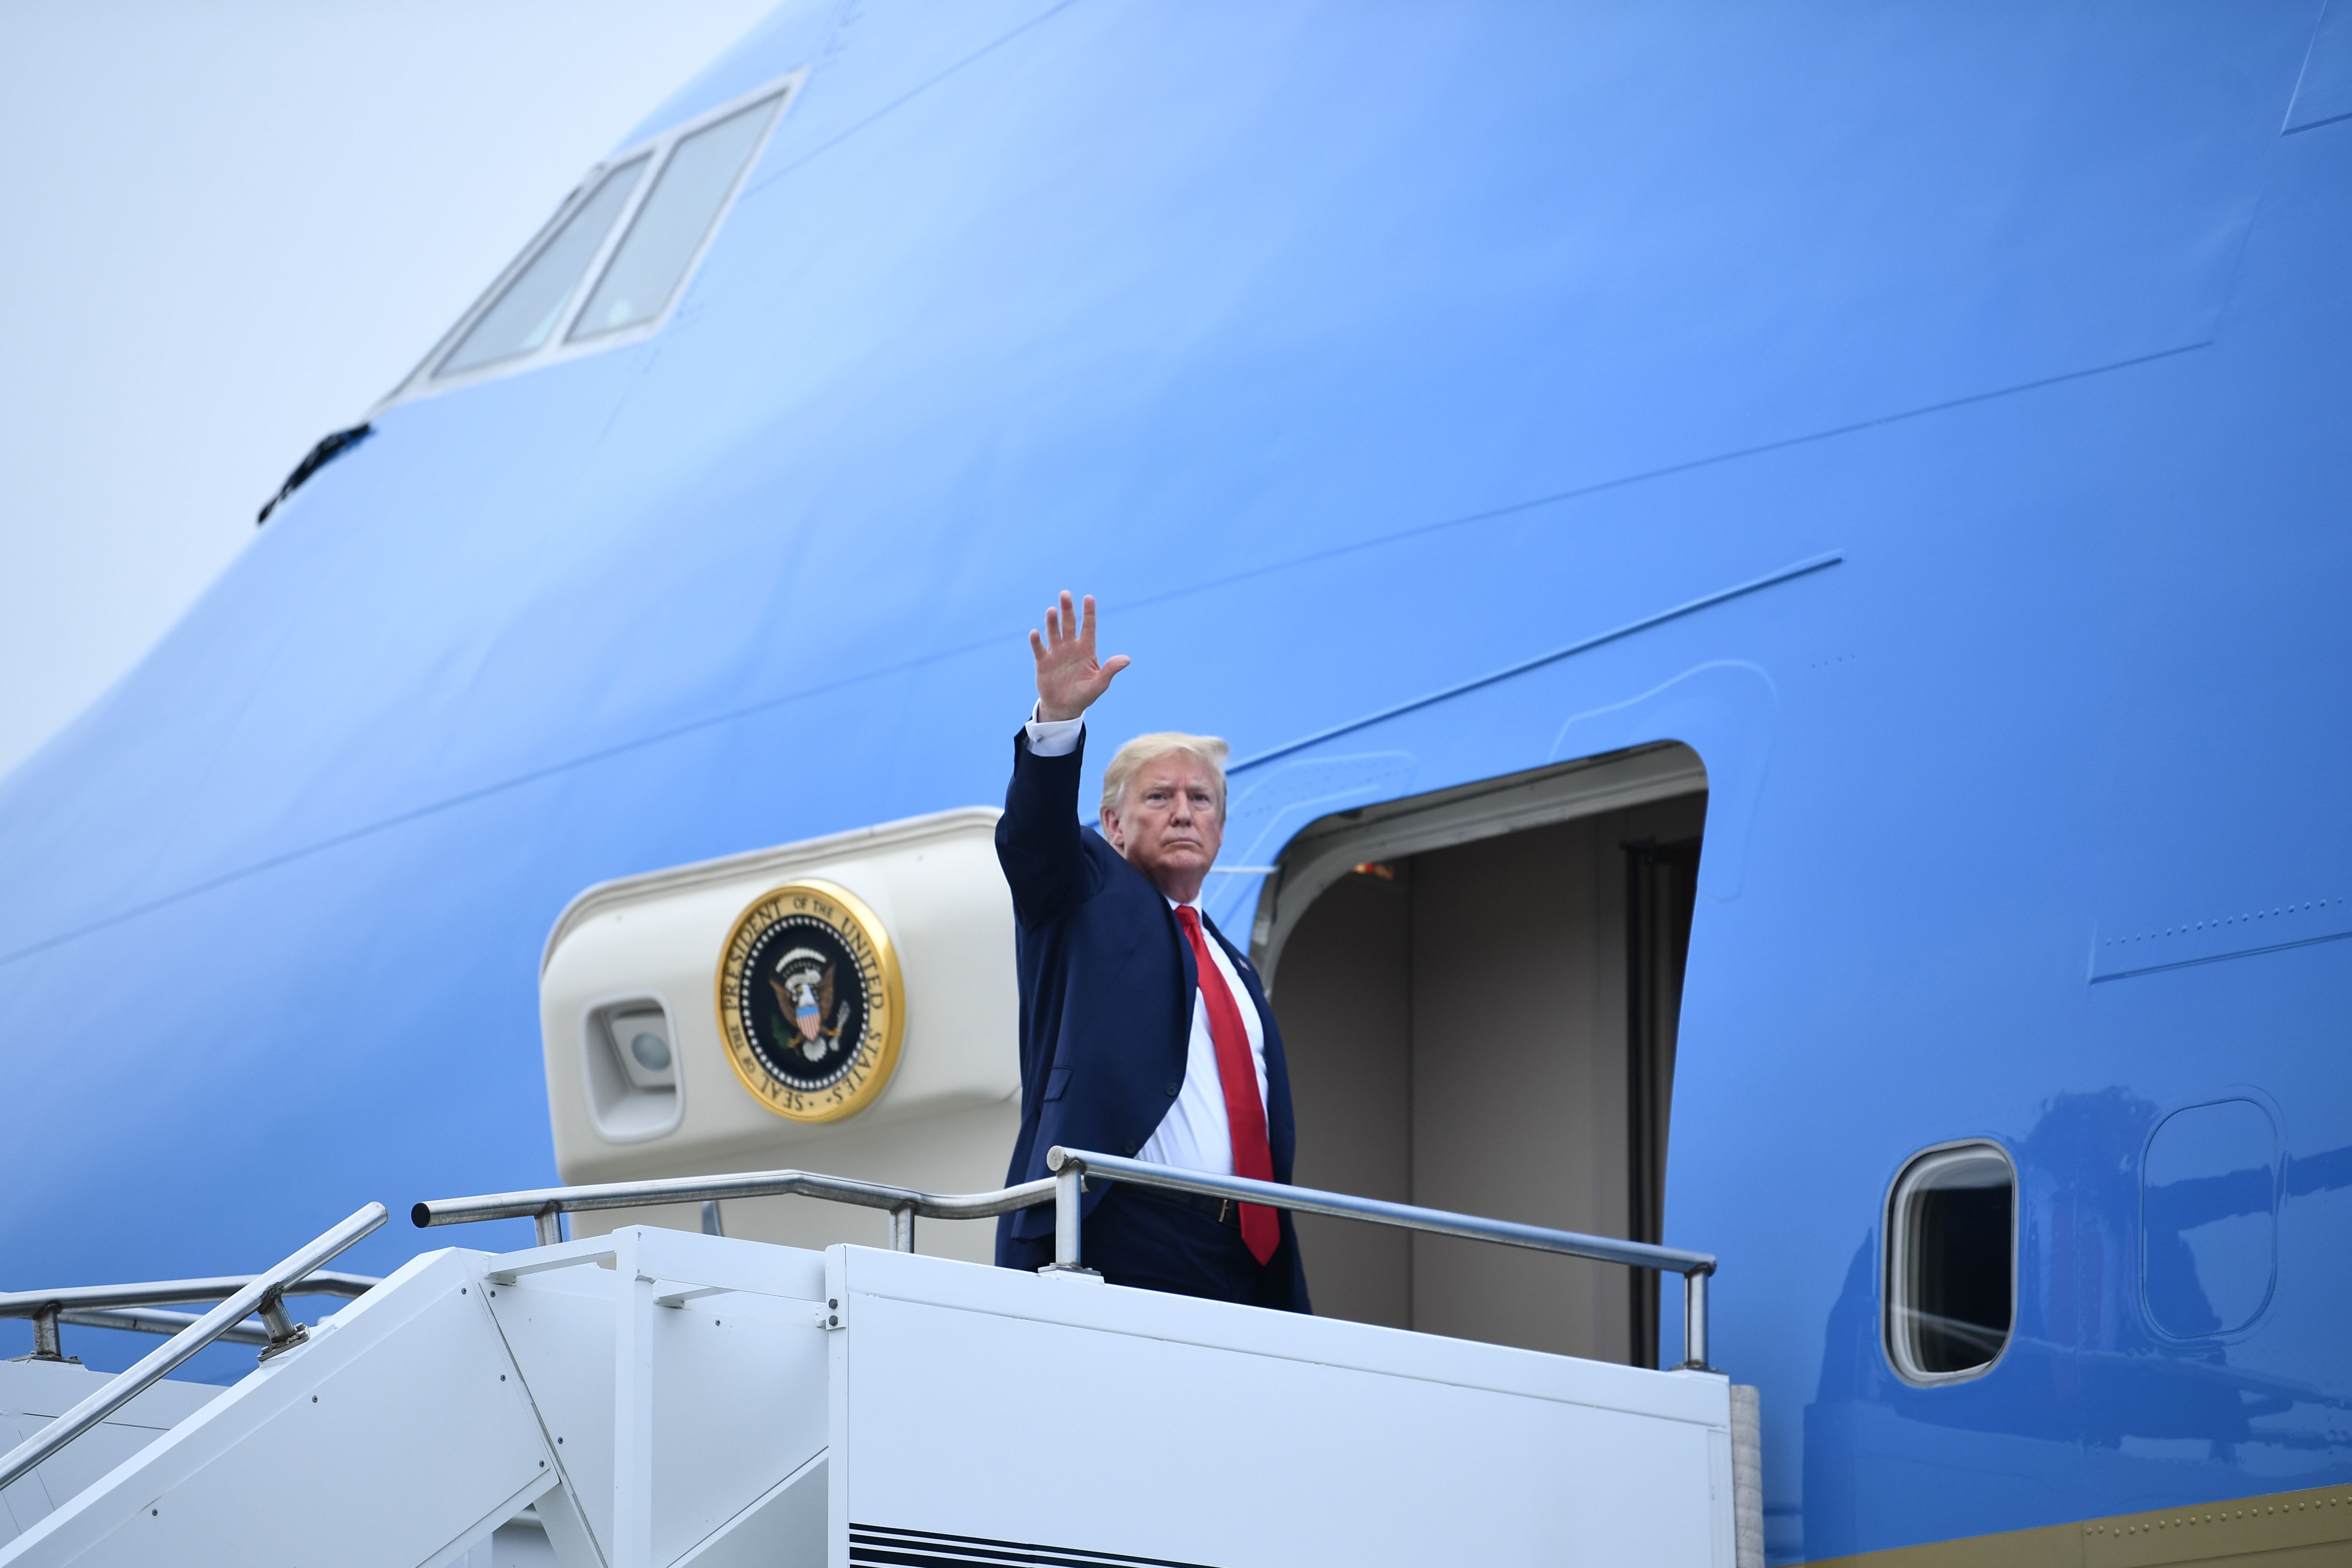 US President Donald Trump boards Air Force One to depart South Korea in Osan Air Base.